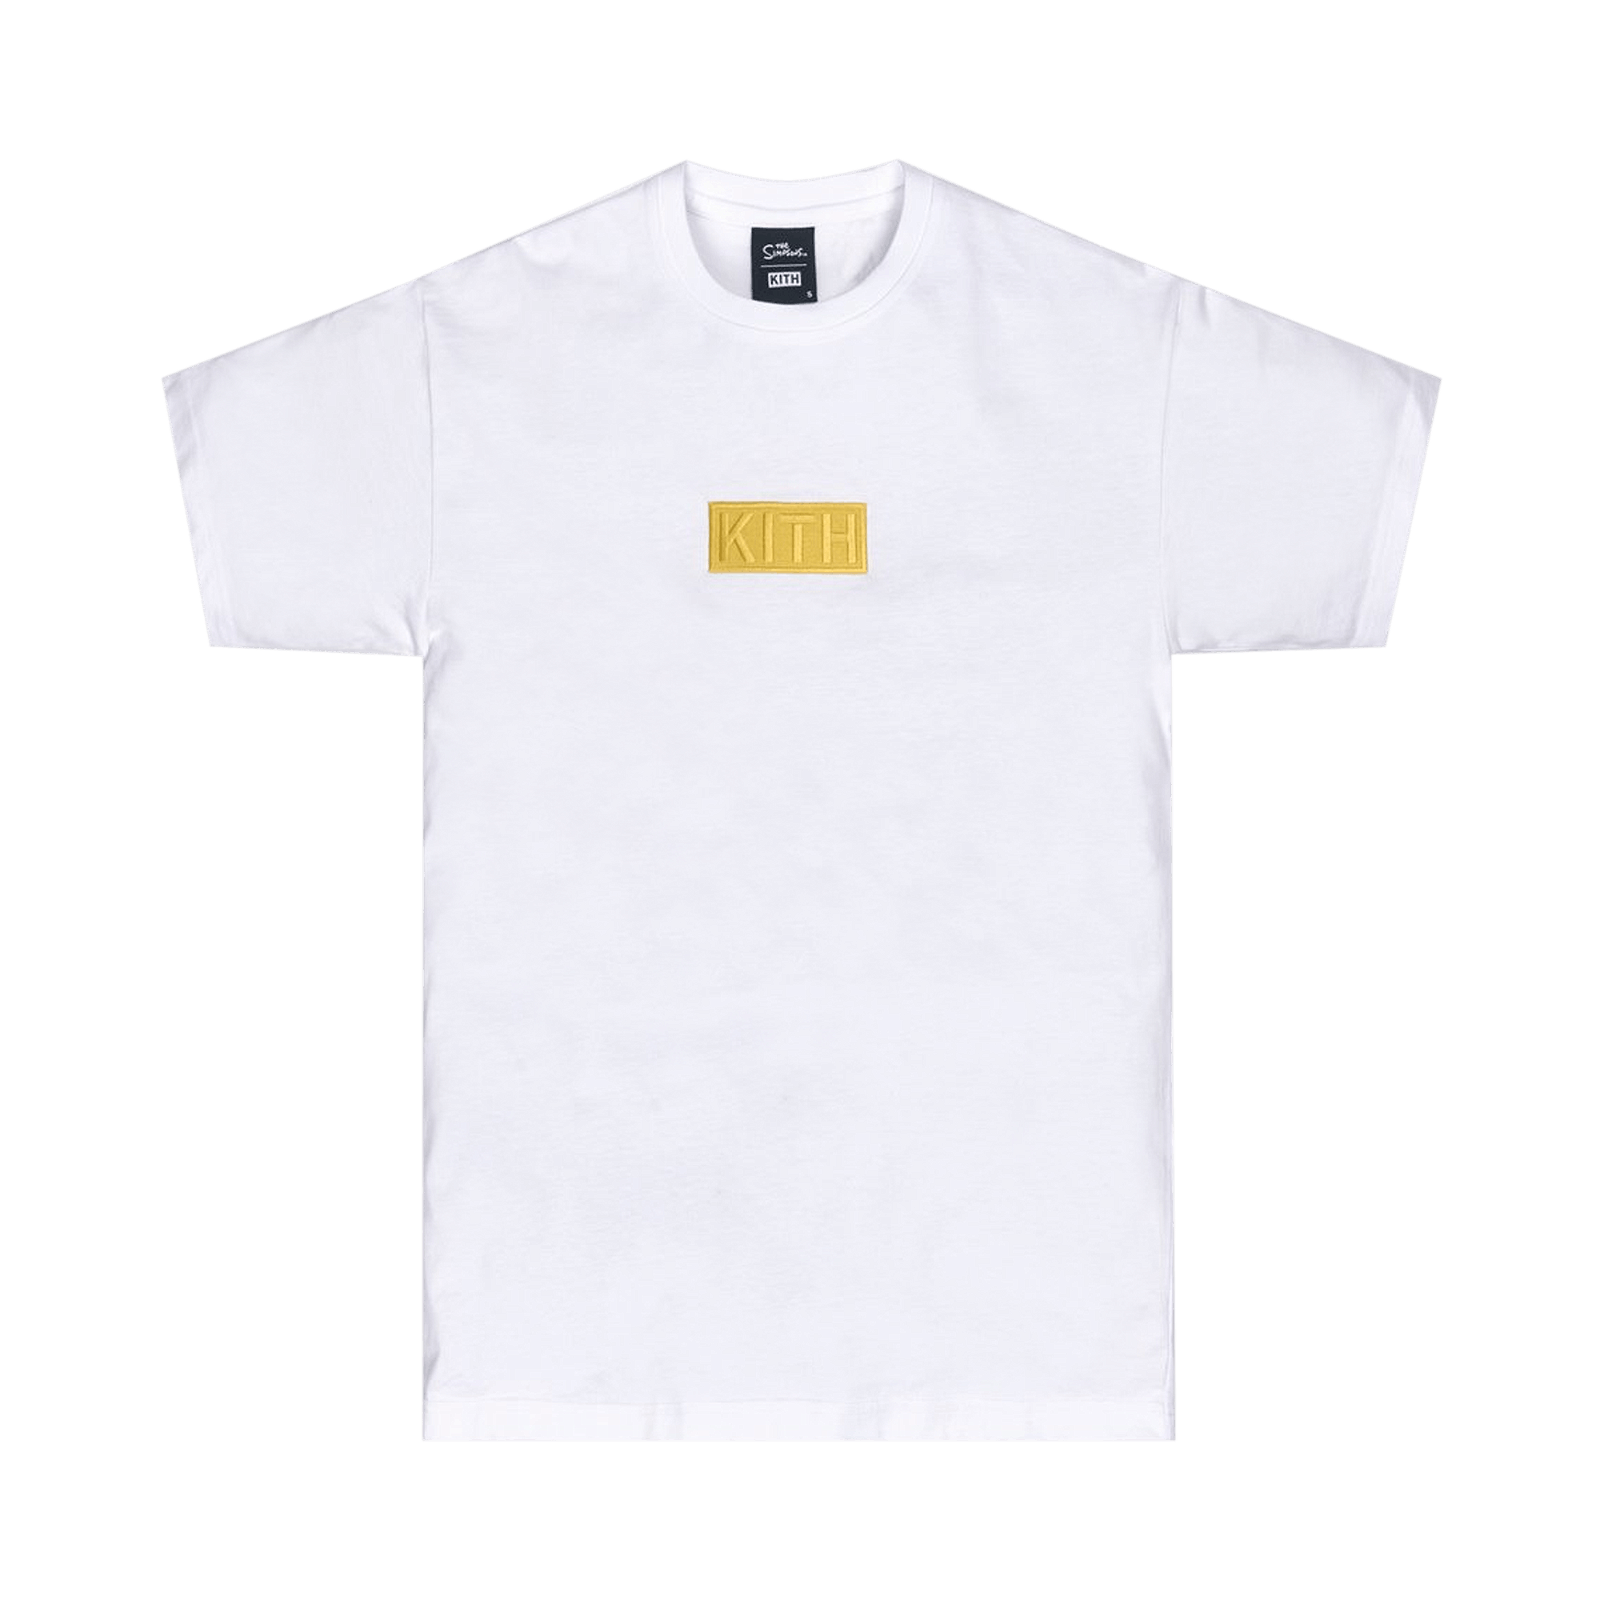 KITH SIMPSONS Sports Family Tee 白 L